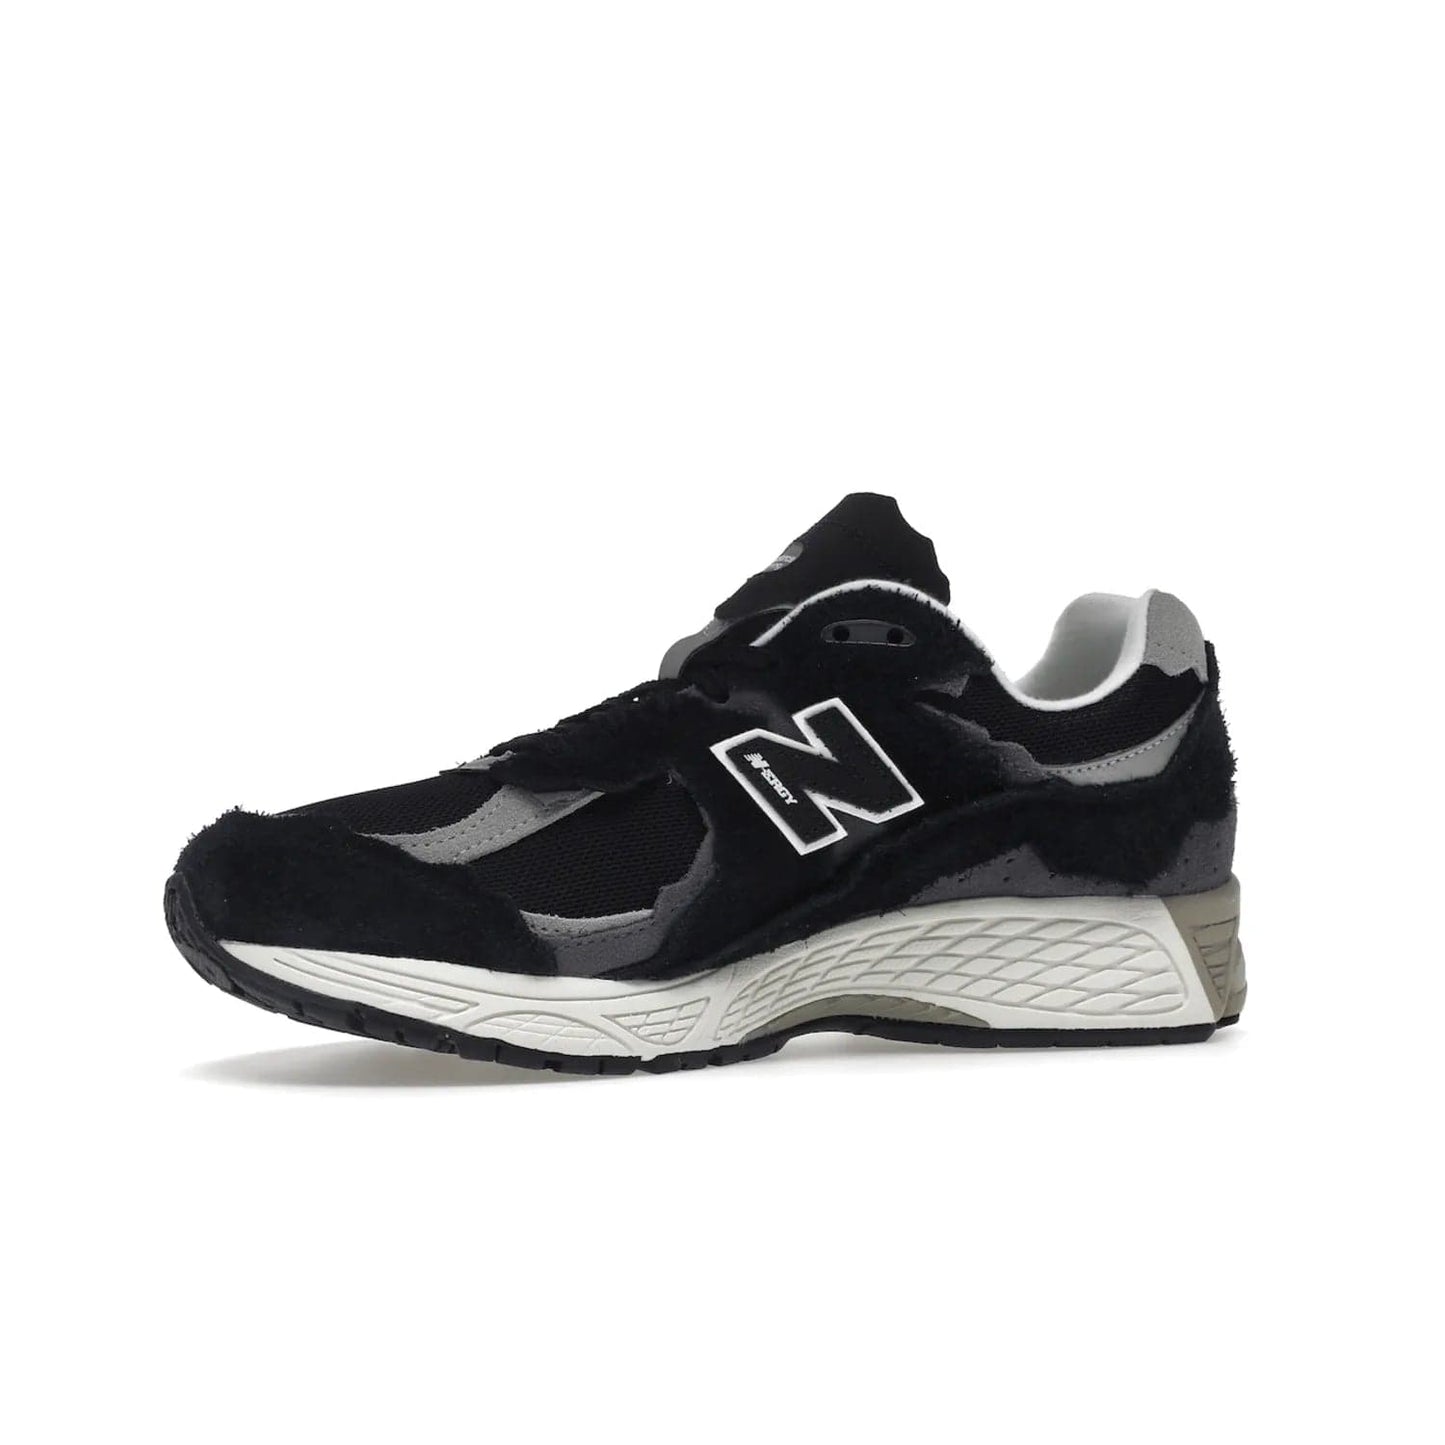 New Balance 2002R Protection Pack Black Grey - Image 17 - Only at www.BallersClubKickz.com - Look stylish in the New Balance 2002R Protection Pack Black Grey. Uppers constructed from premium materials like mesh and synthetic overlays. Iconic "N" emblem appears in white and black. ABZORB midsole for shock absorption and responsiveness. Black outsole for grip and traction. Lacing system offers customized fit and cushioned tongue and collar offer comfort and stability. Step up your style with this must-hav